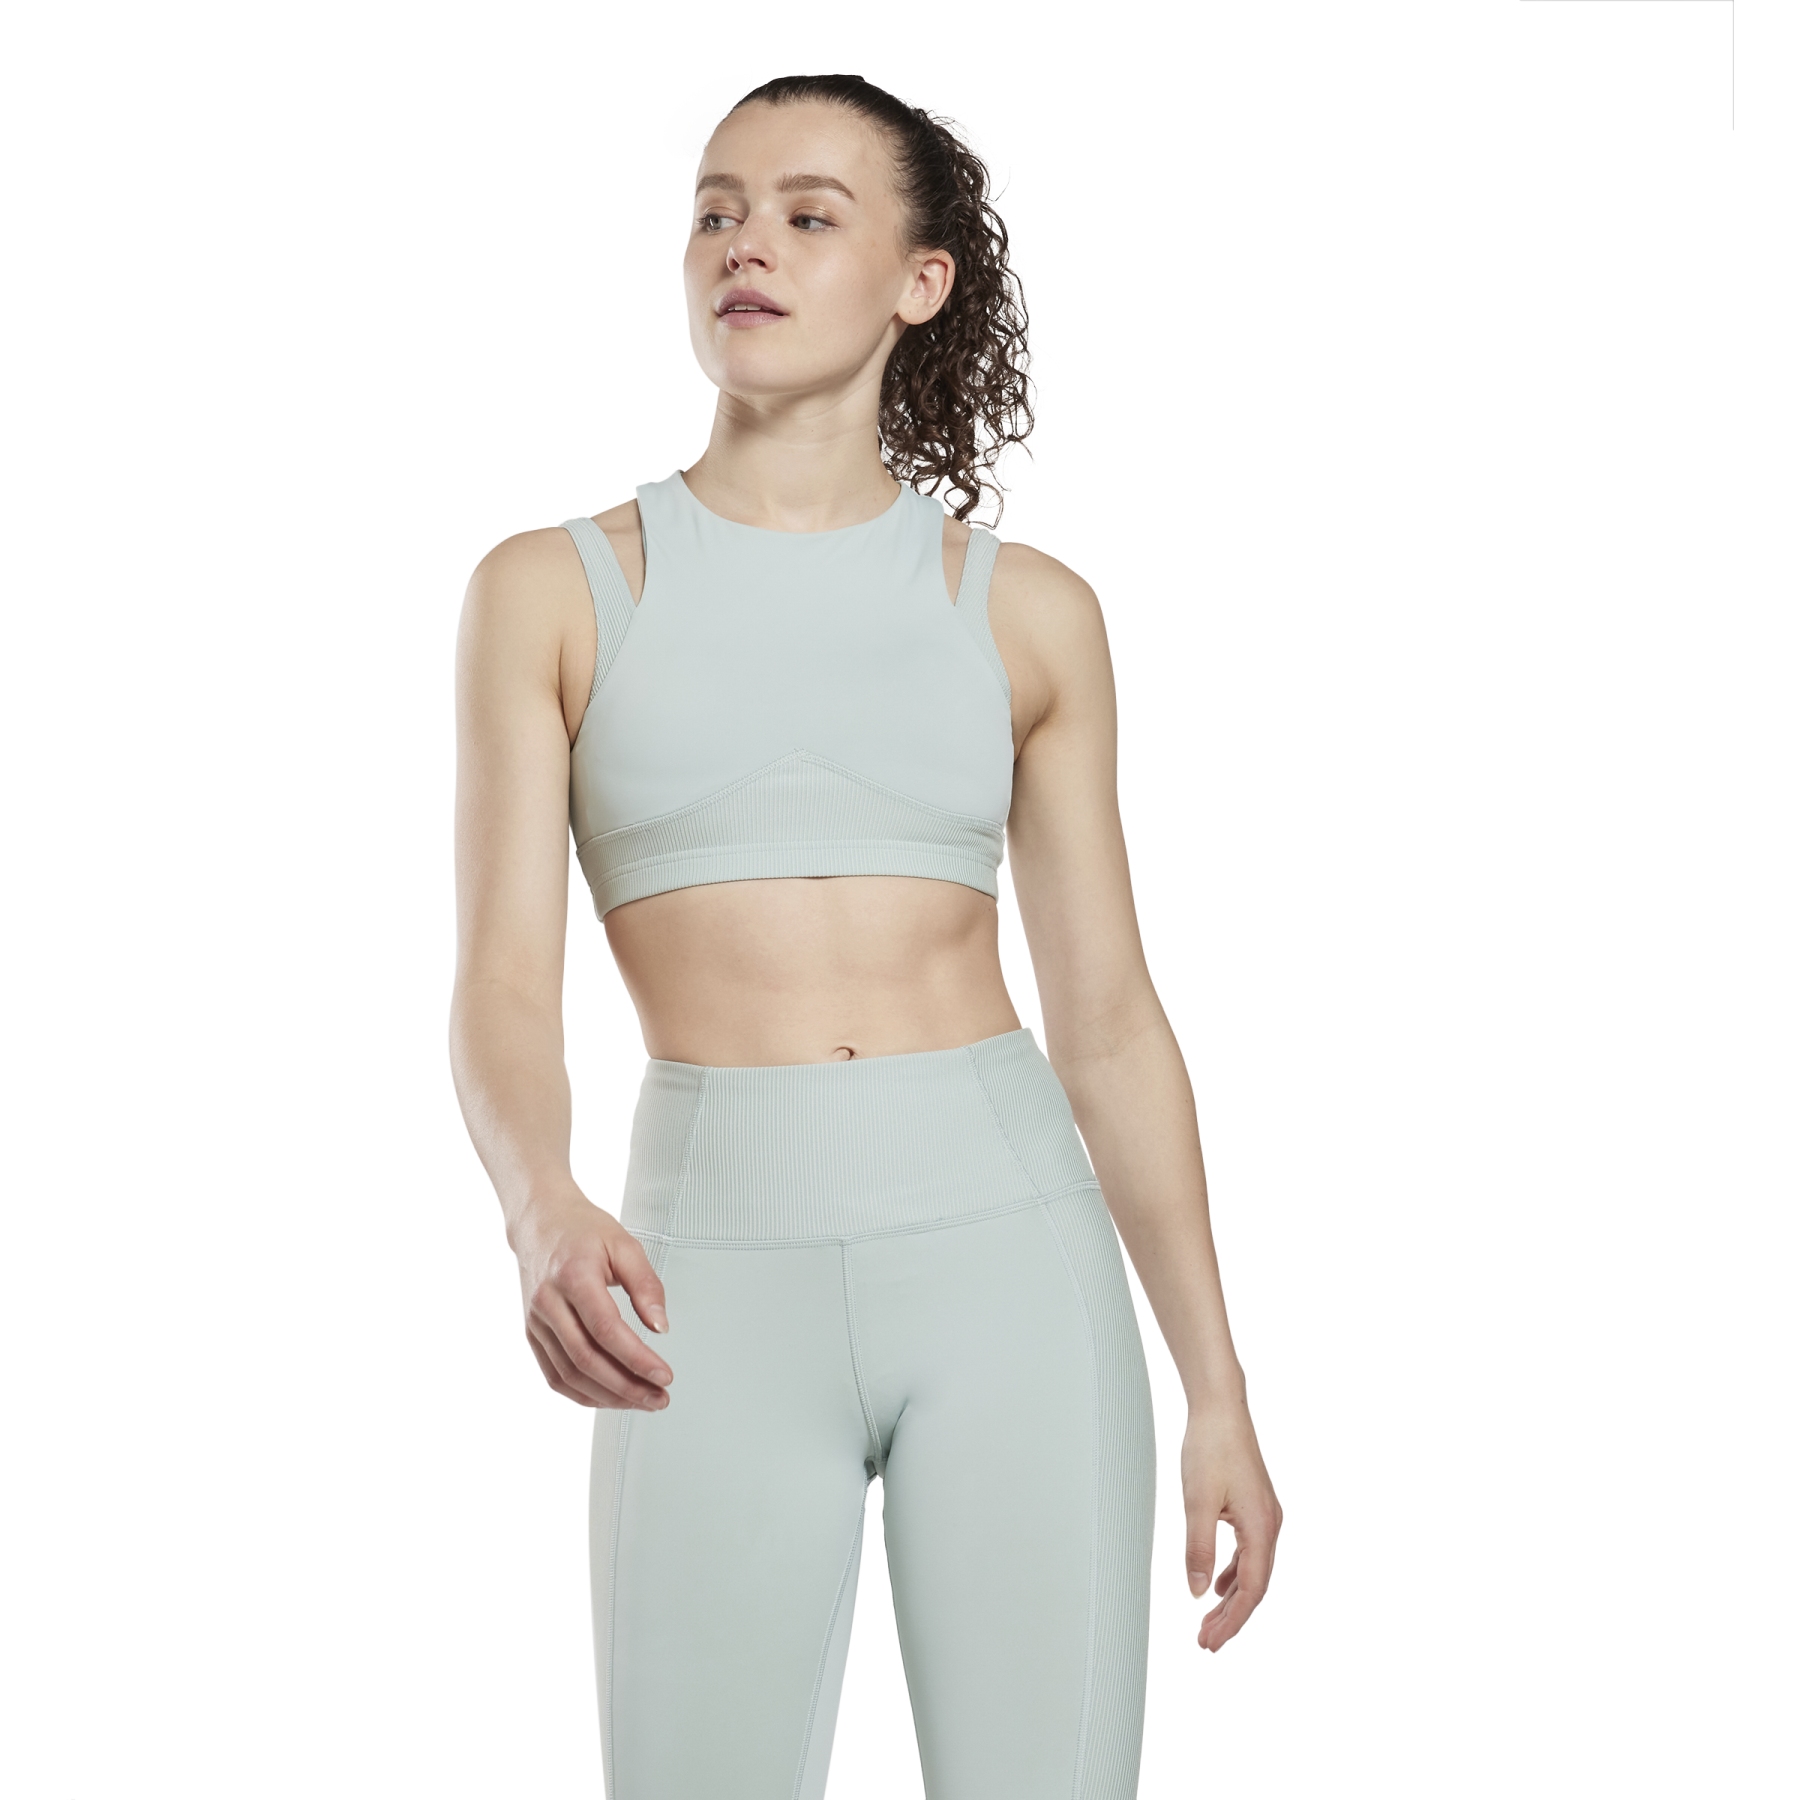 Picture of Reebok Layered Bra Tops Women - seagry